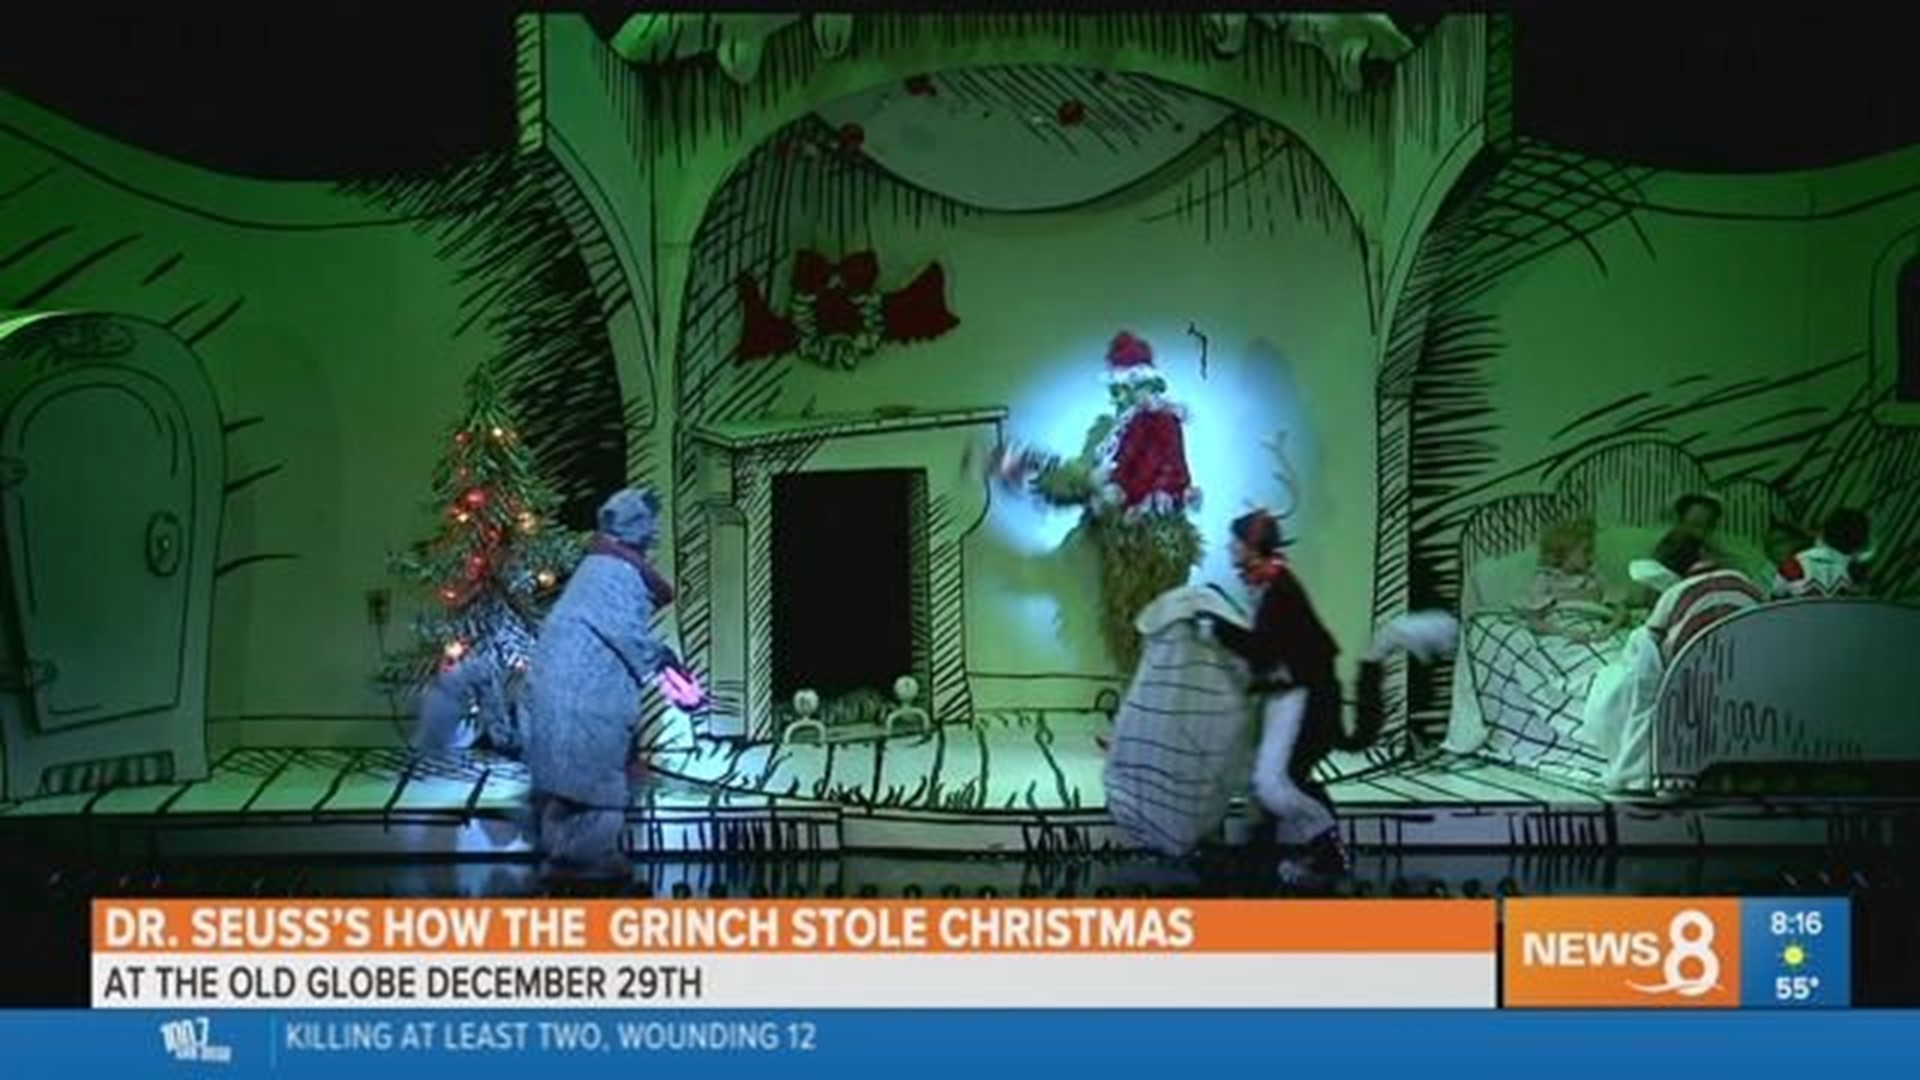 The Old Globe presents Dr. Seuss’s ‘How The Grinch Stole Christmas